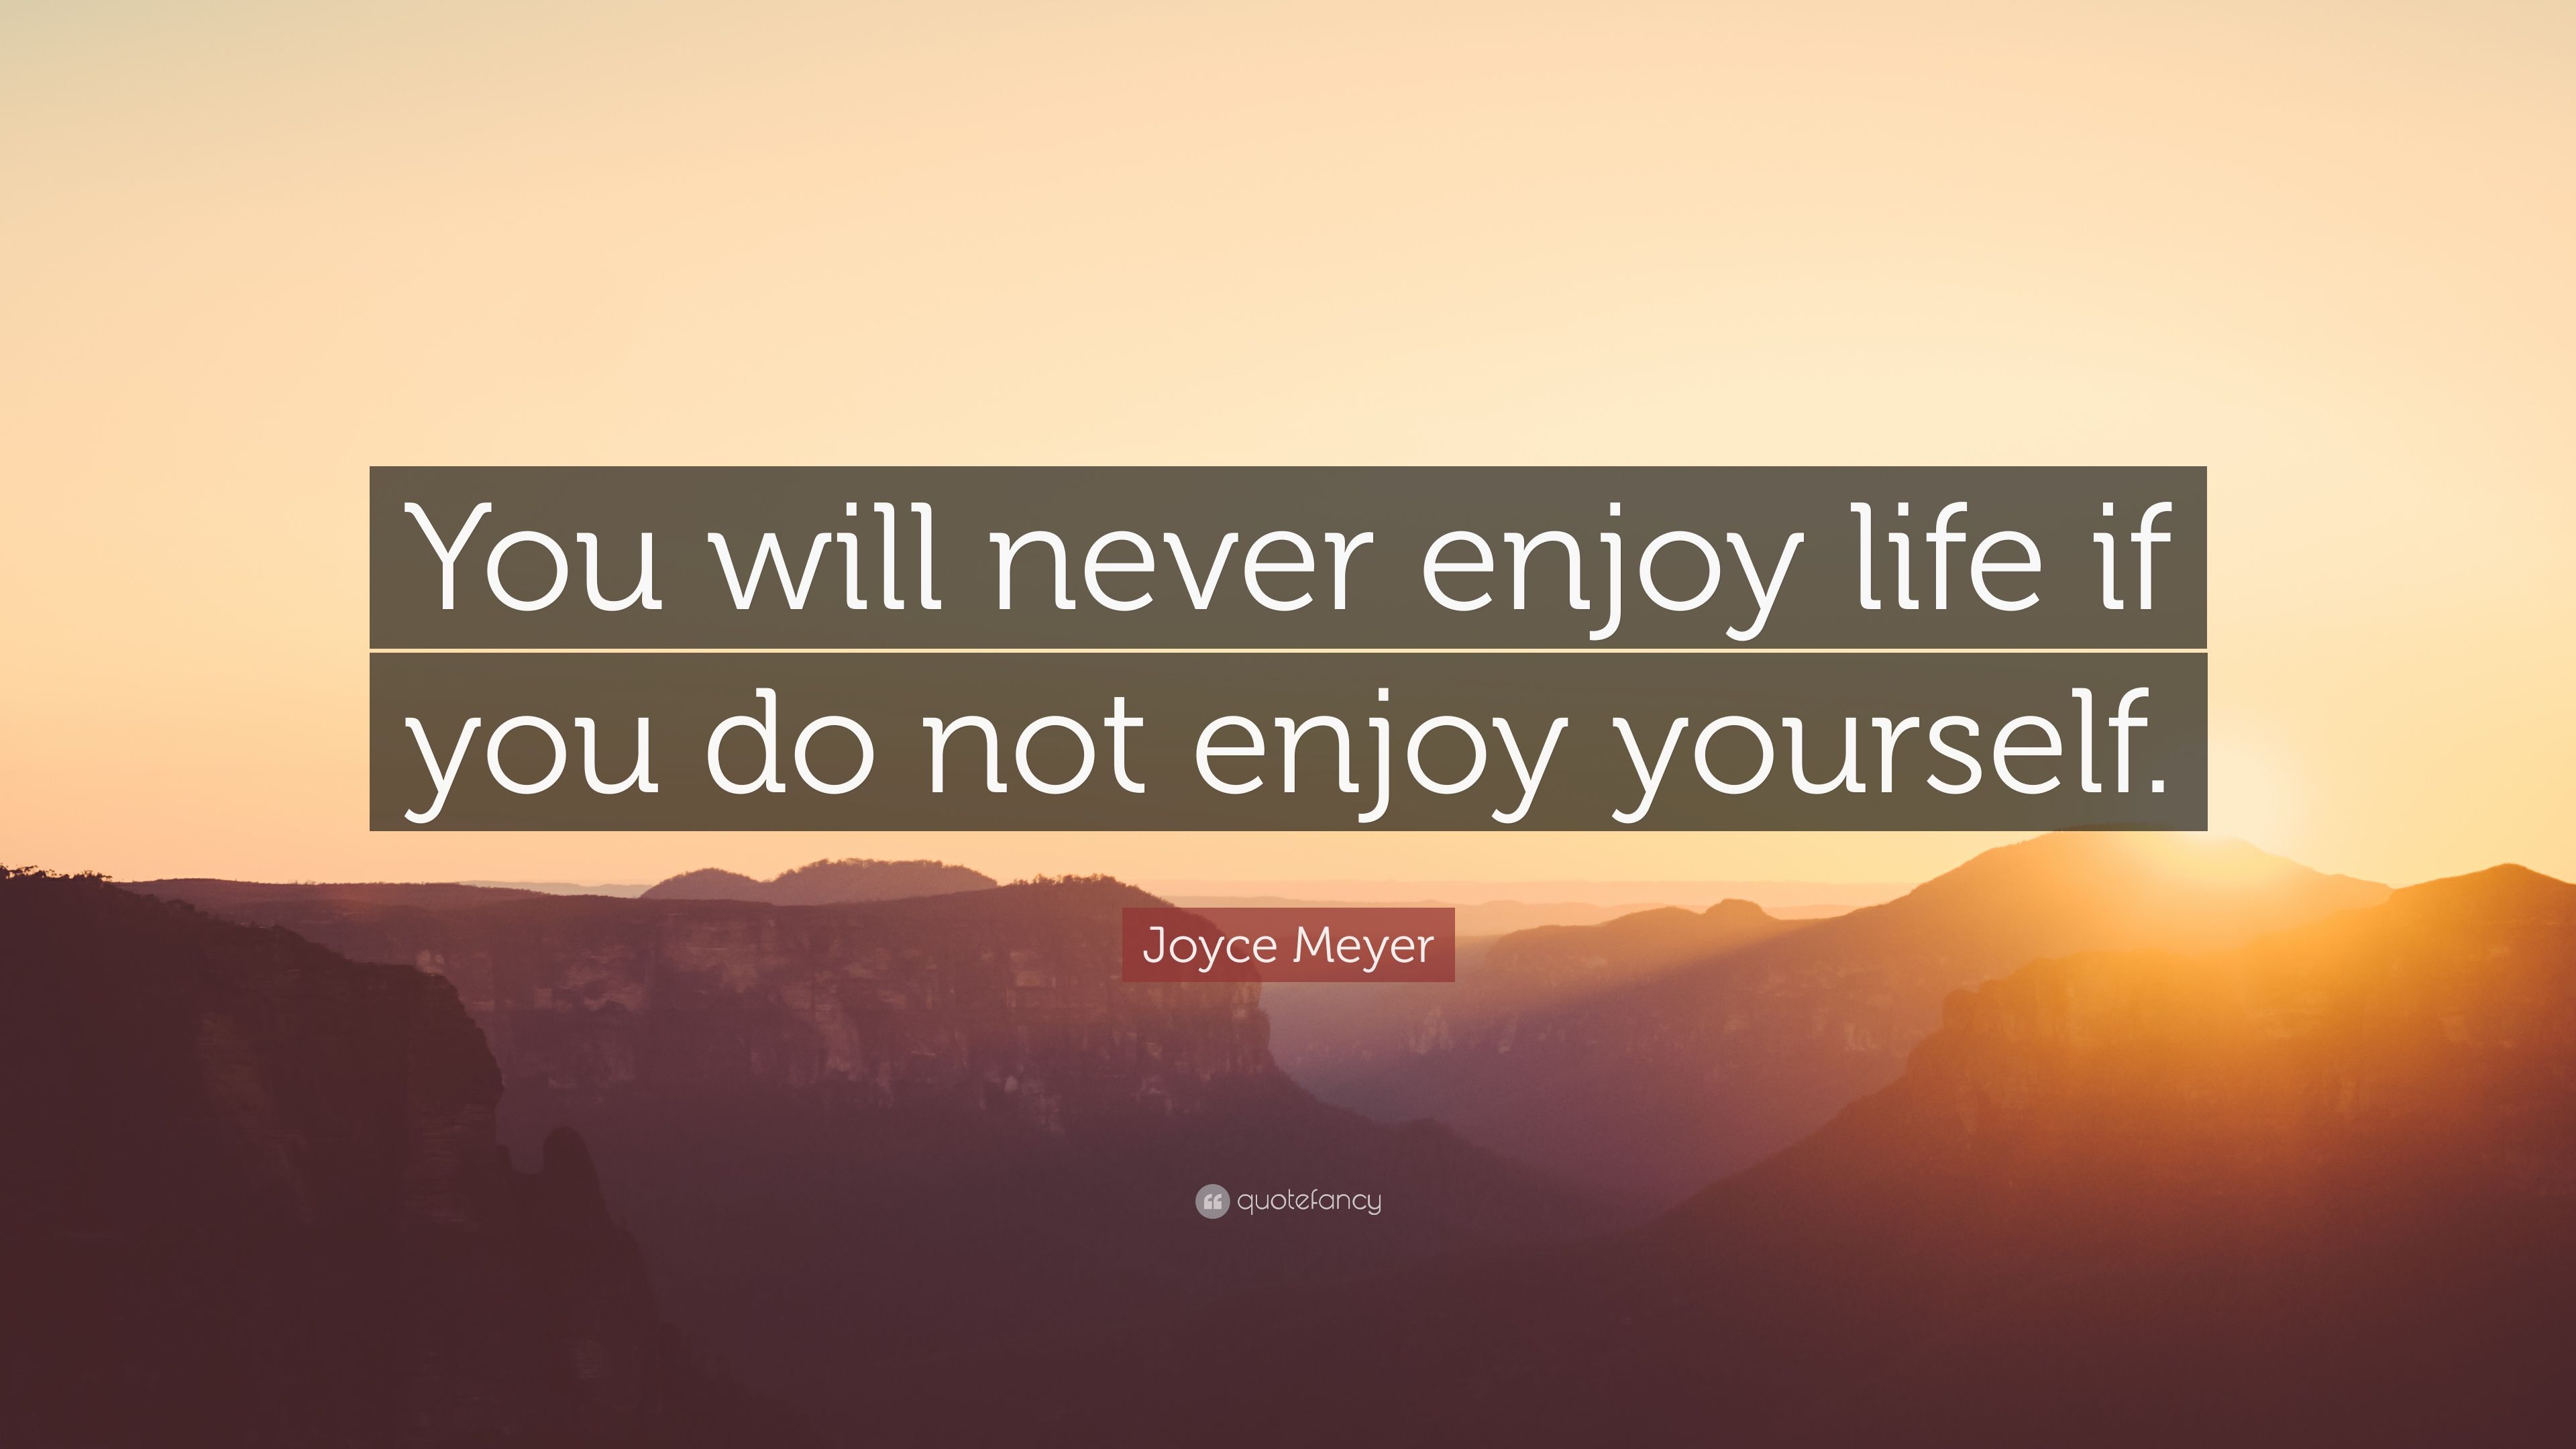 Joyce Meyer Quote: “You will never enjoy life if you do not enjoy yourself.” (12 wallpaper)